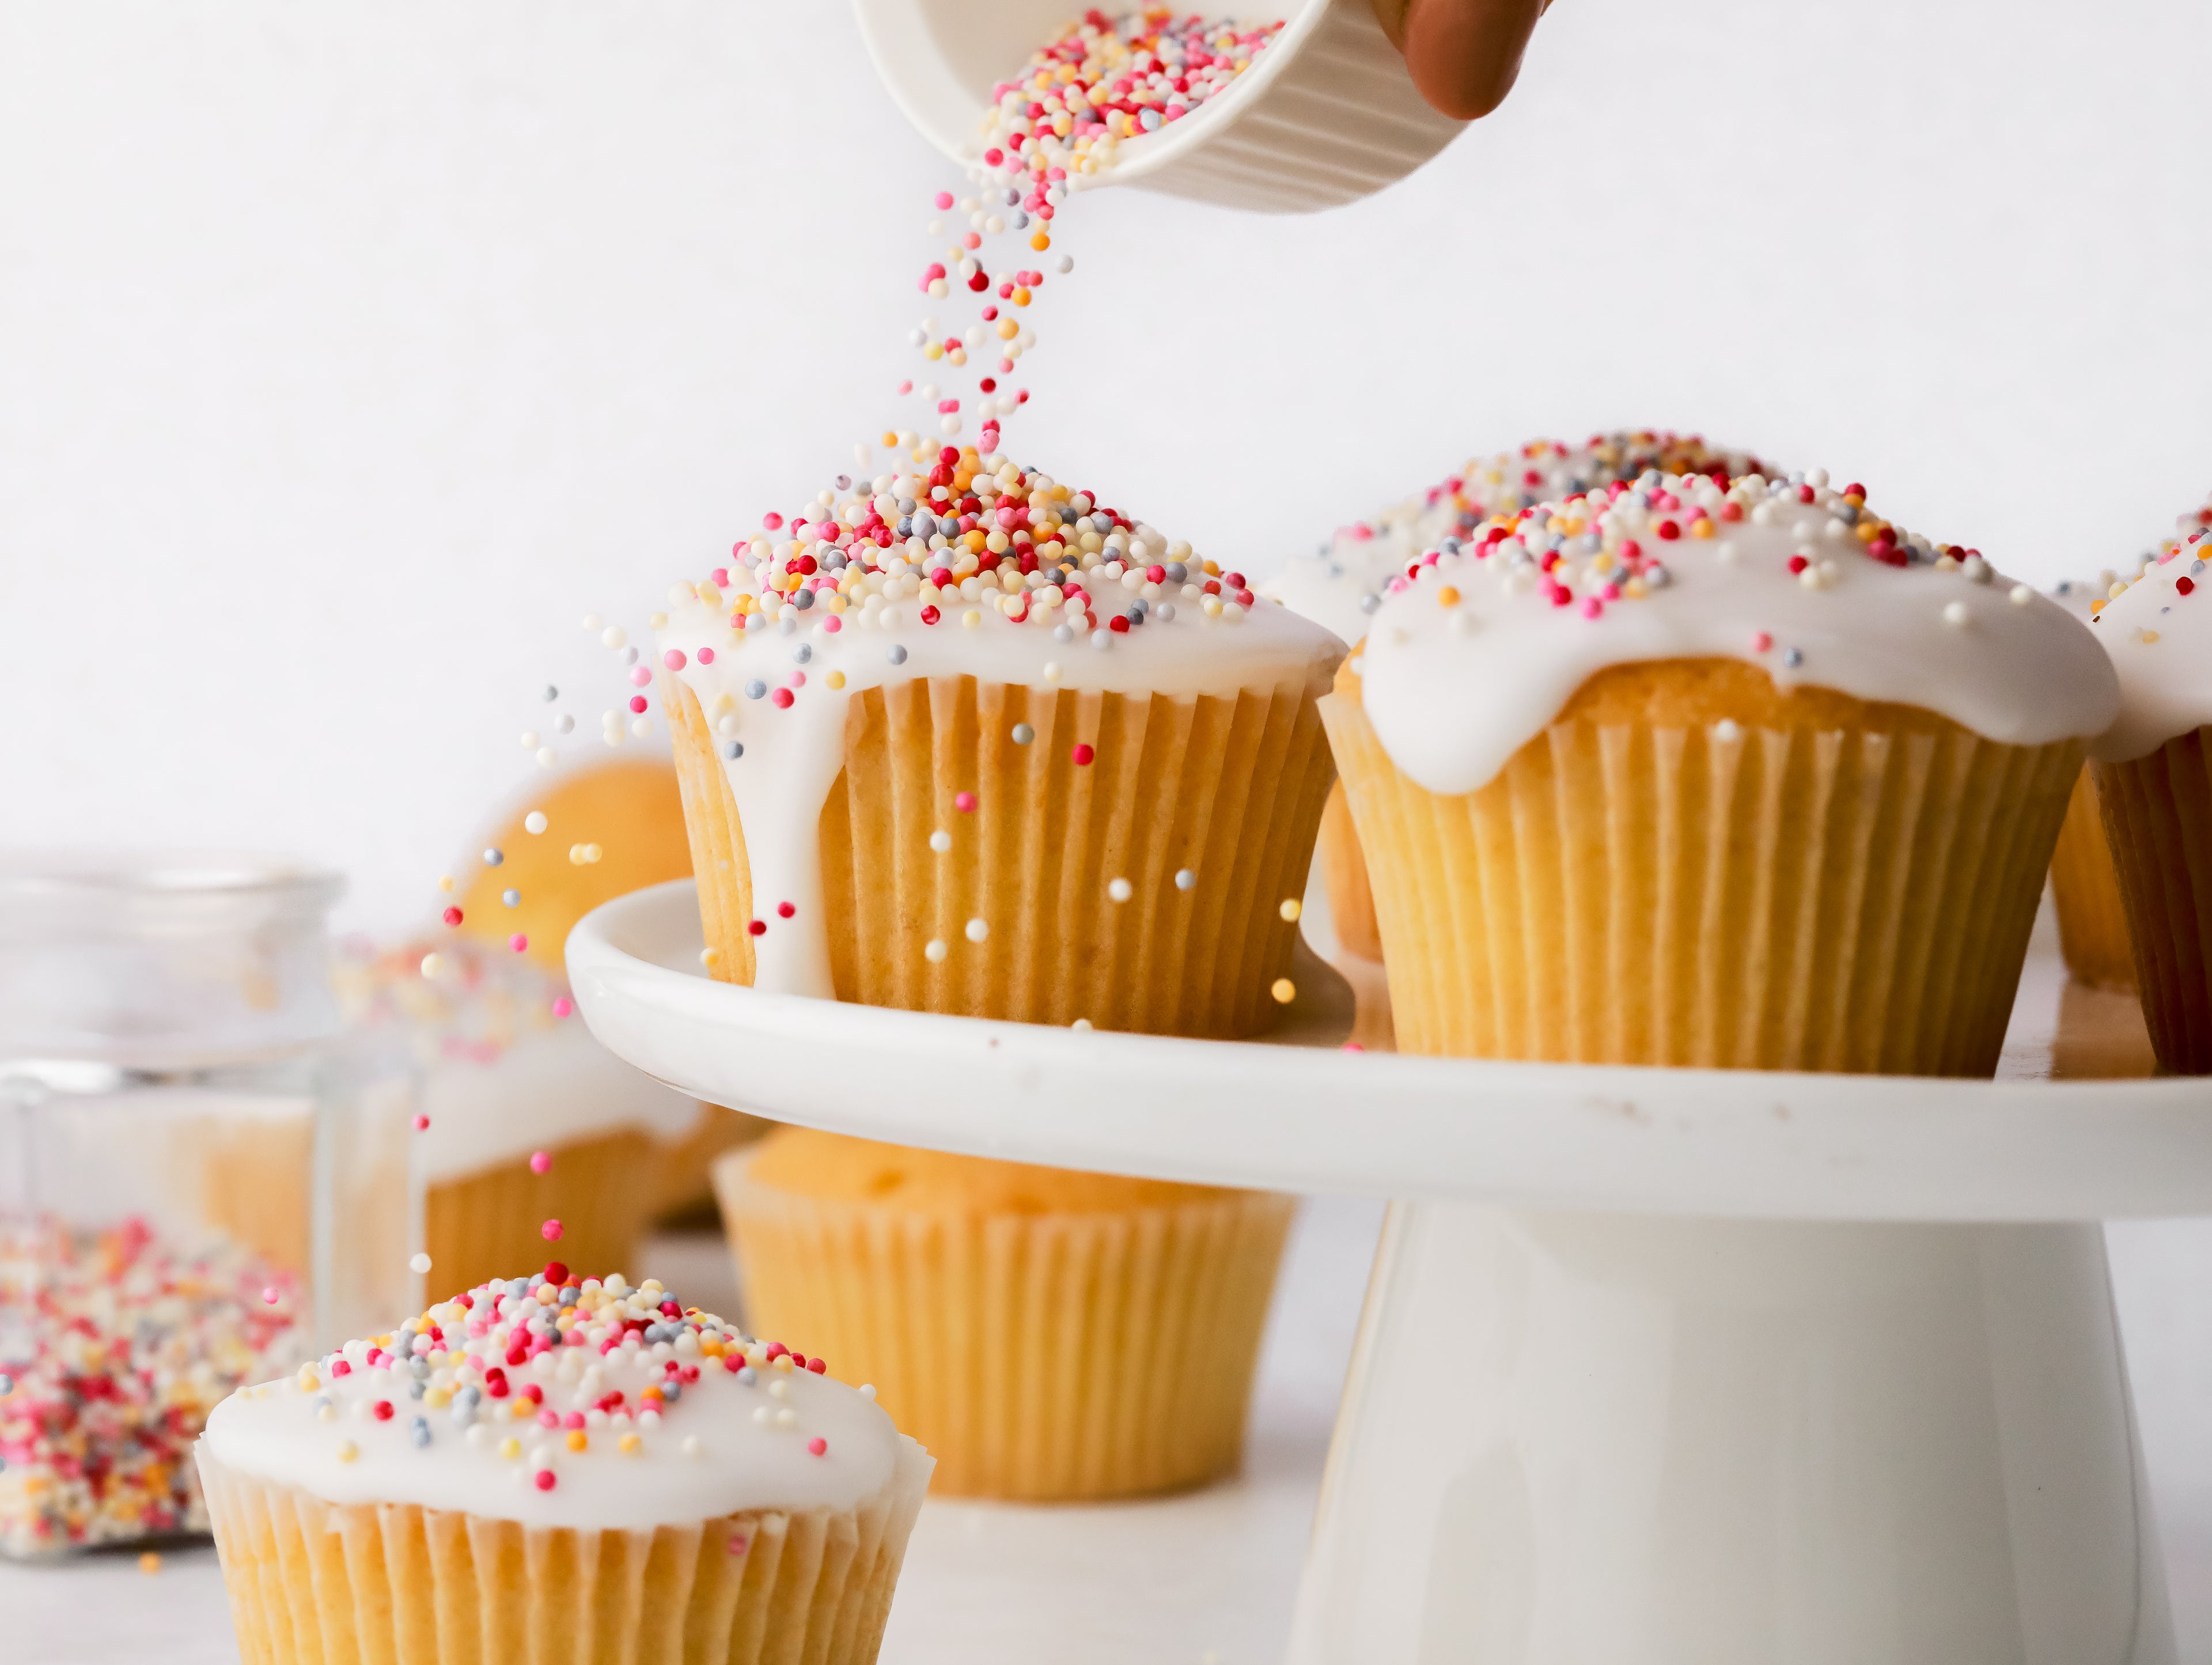 Sprinkles being poured on top of a fairy cake covered in white icing 